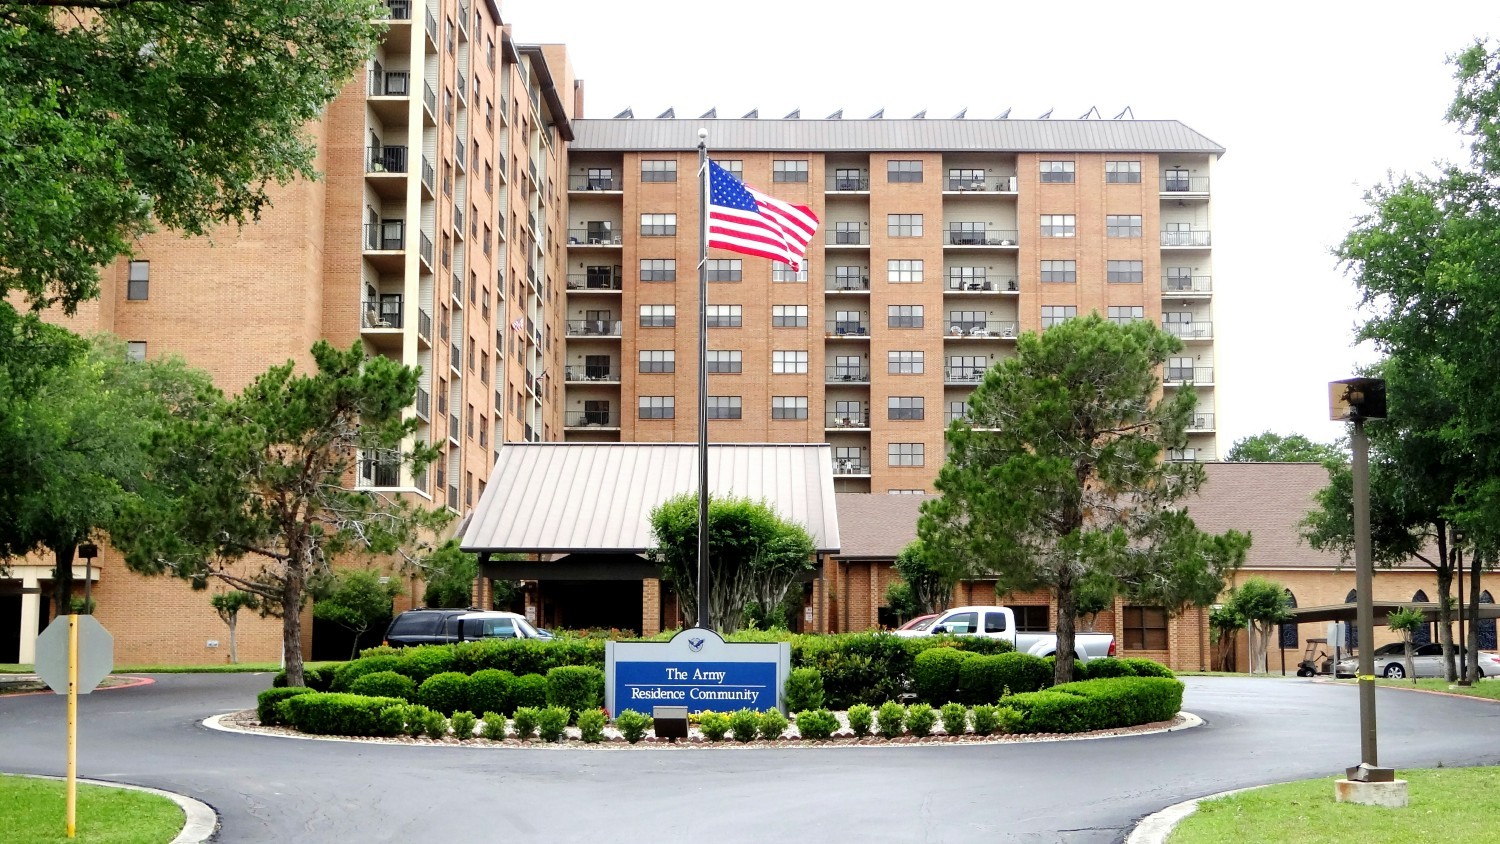 Army Residence Community- High-rise